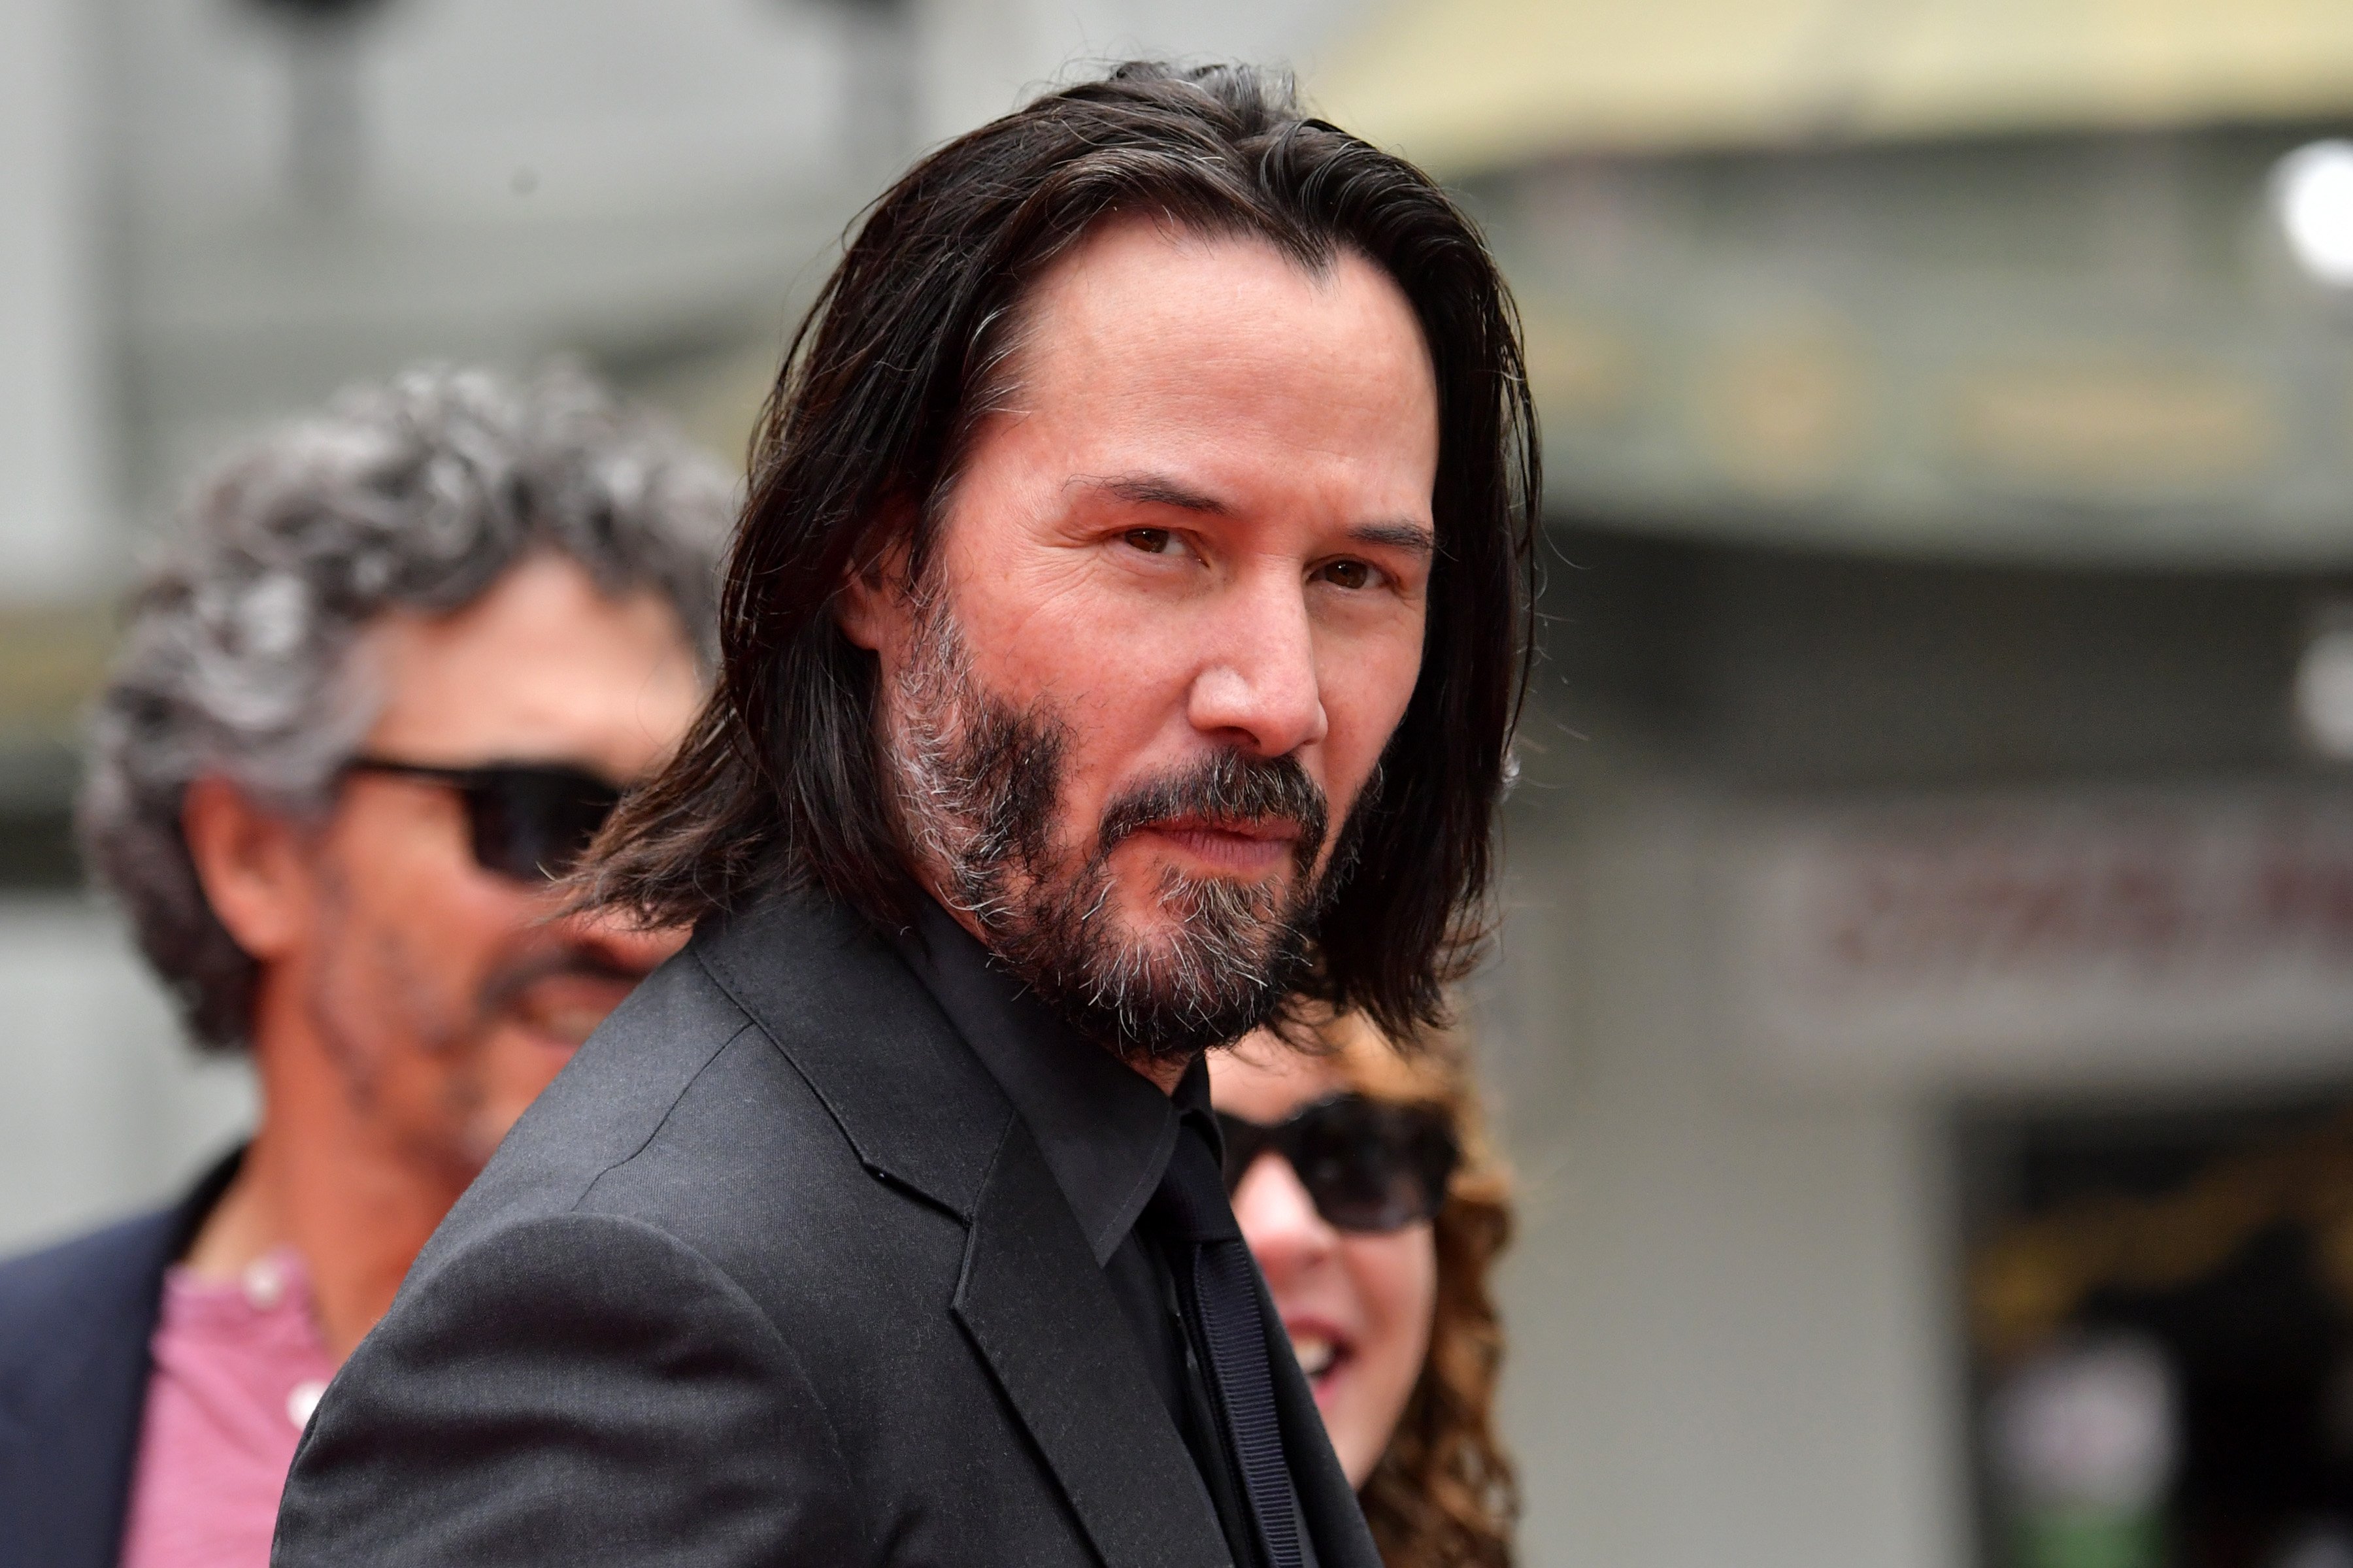 Keanu Reeves arrives for his handprint ceremony on May 14, 2019. | Photo: Getty Images.